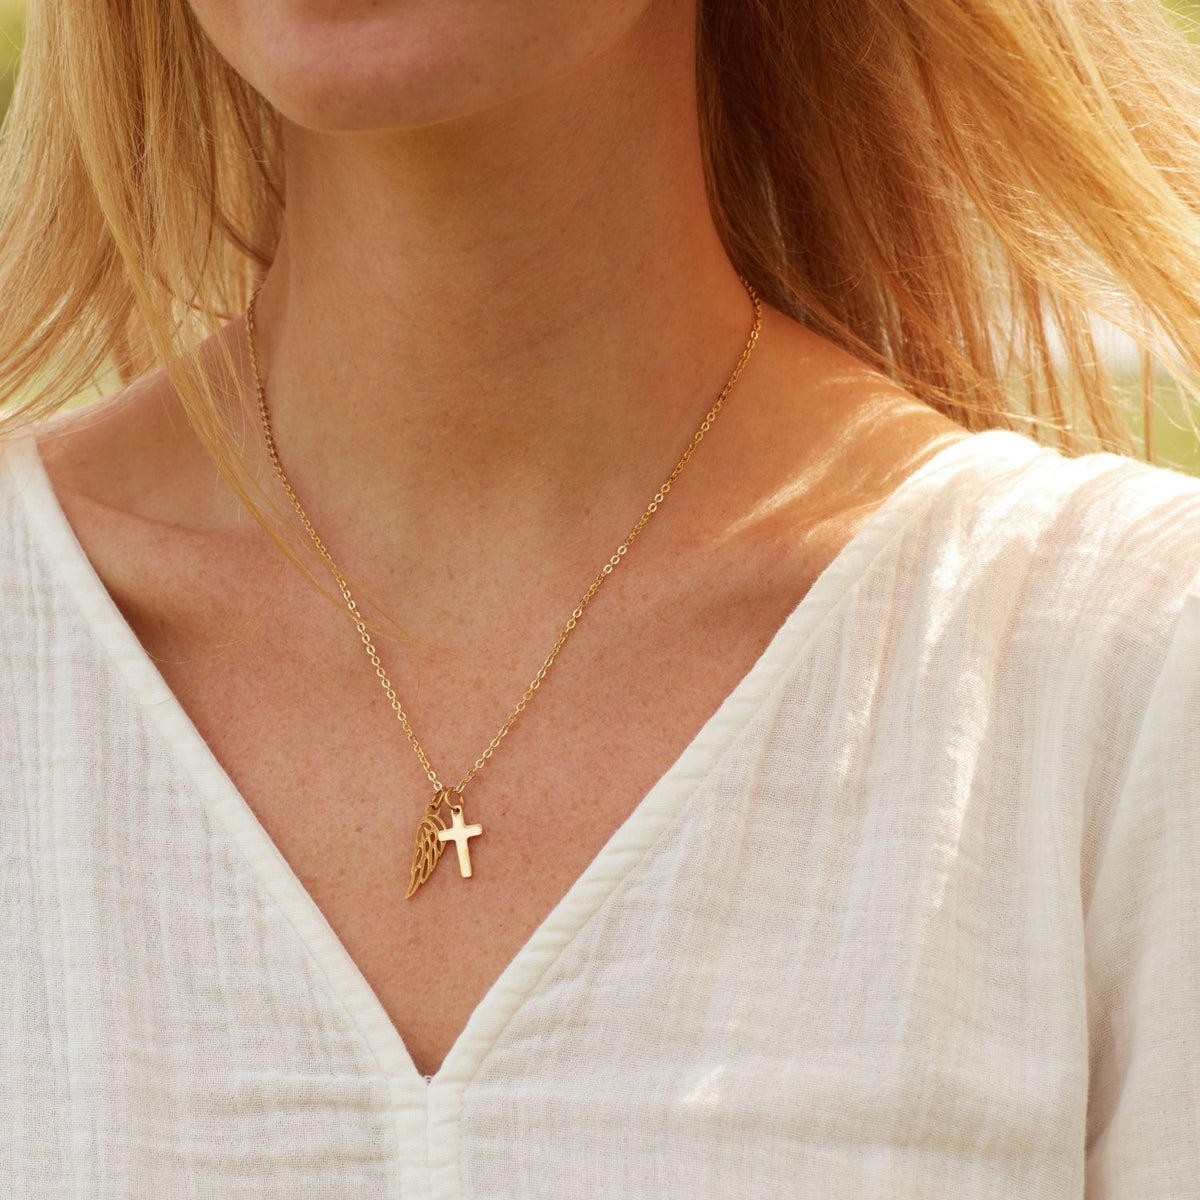 To A Fine Young Woman on Her Confirmation | May the Holy Spirit | Cross Necklace